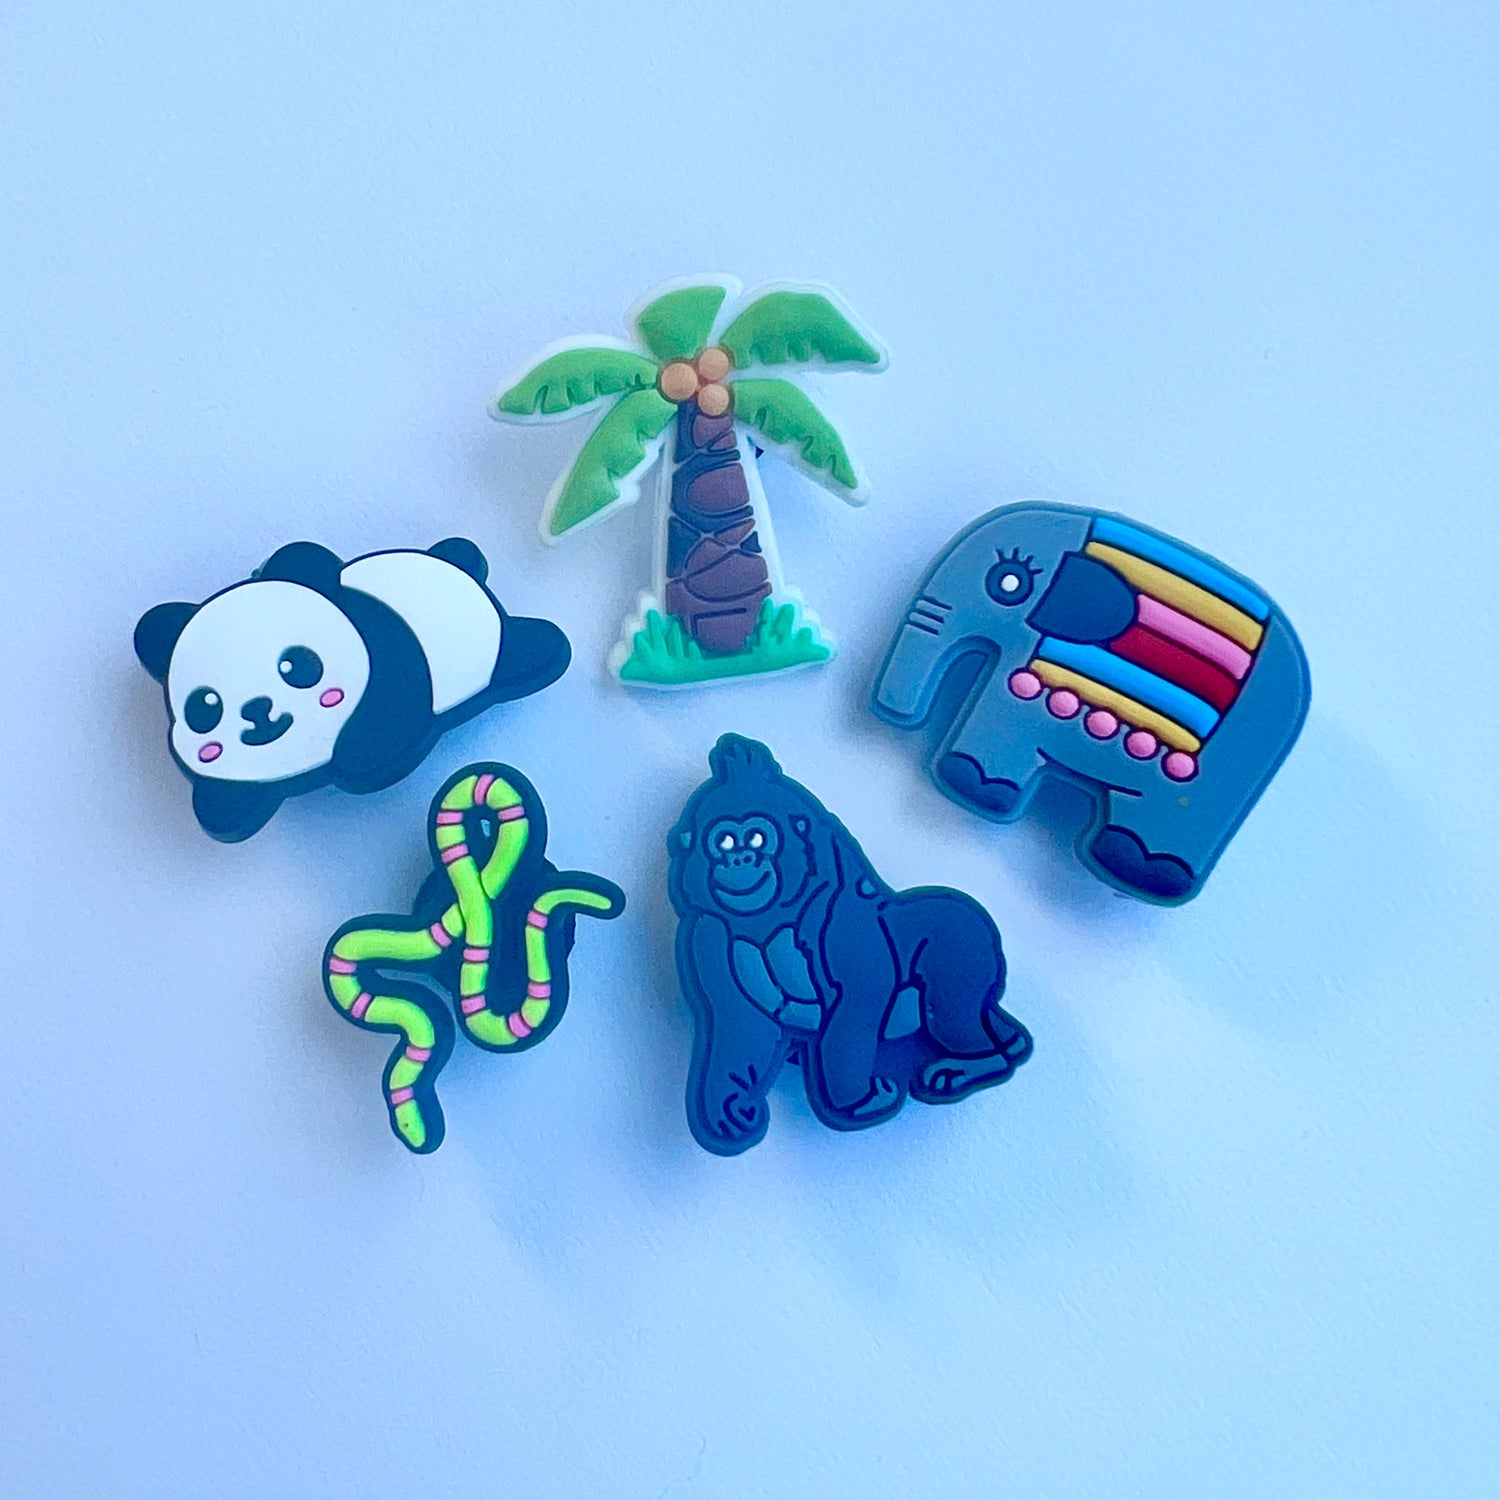 The Jungle Charms Pack